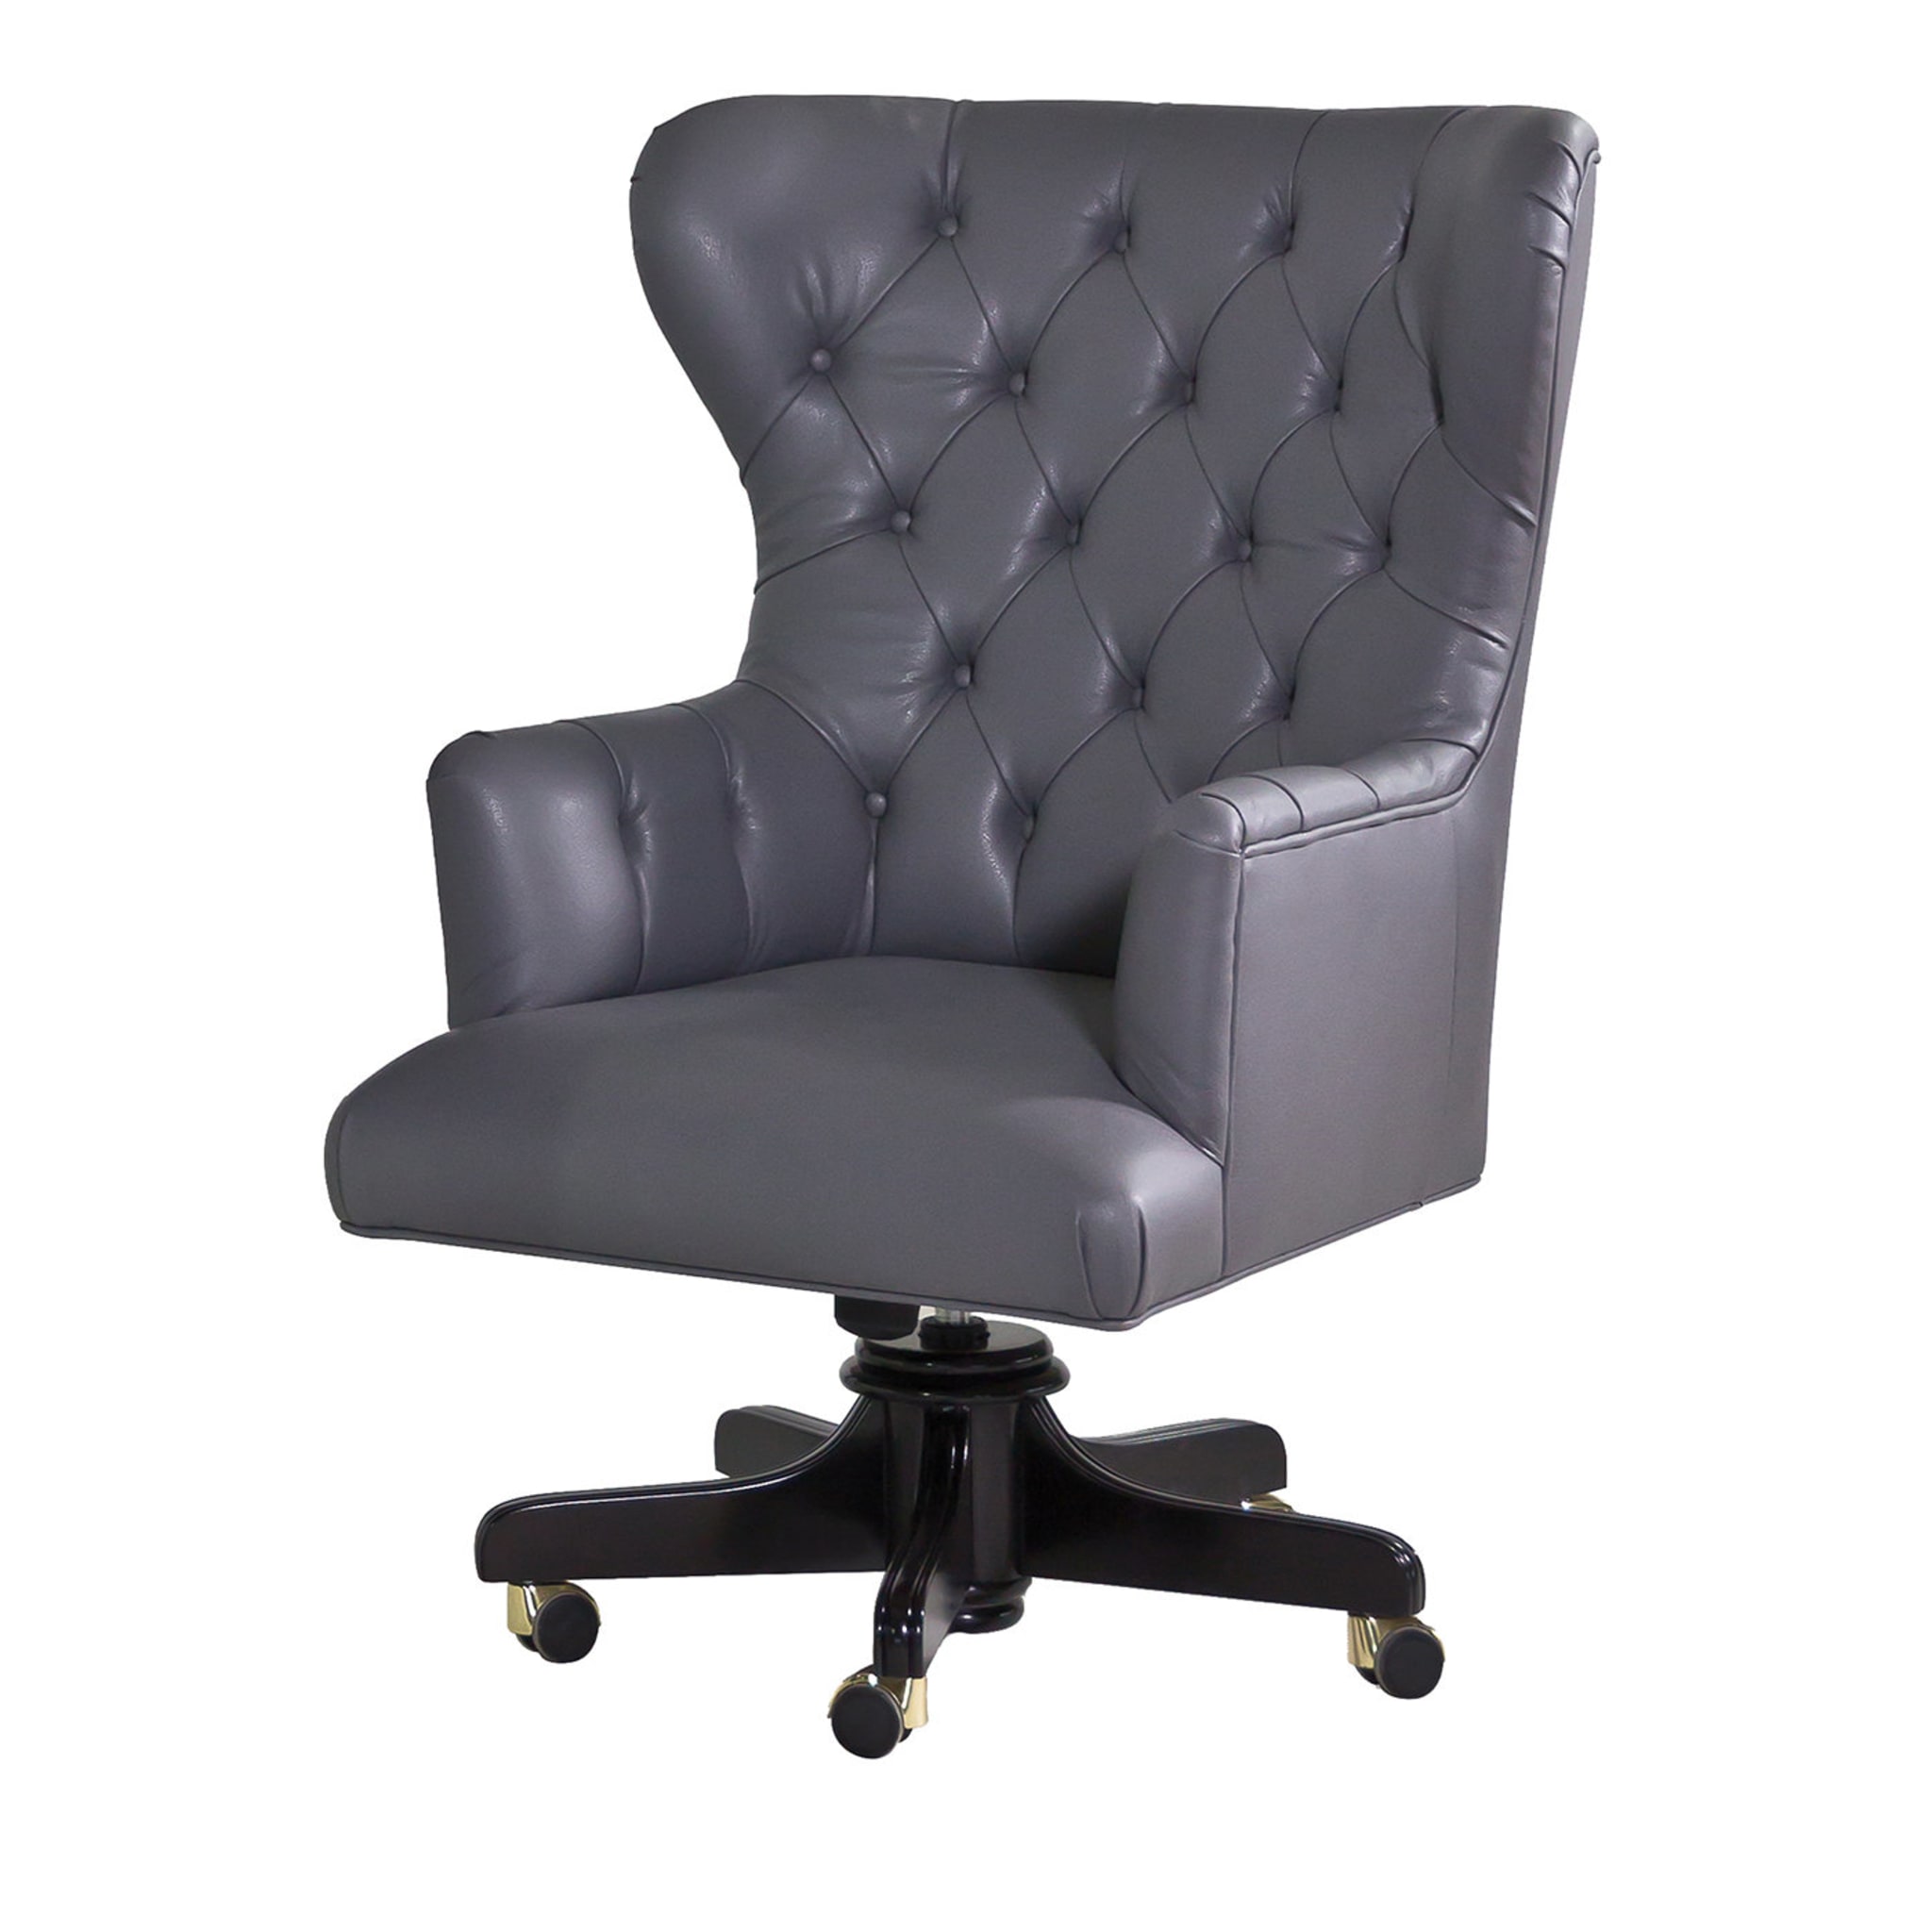 Tufted Wheeled Gray Armchair - Main view